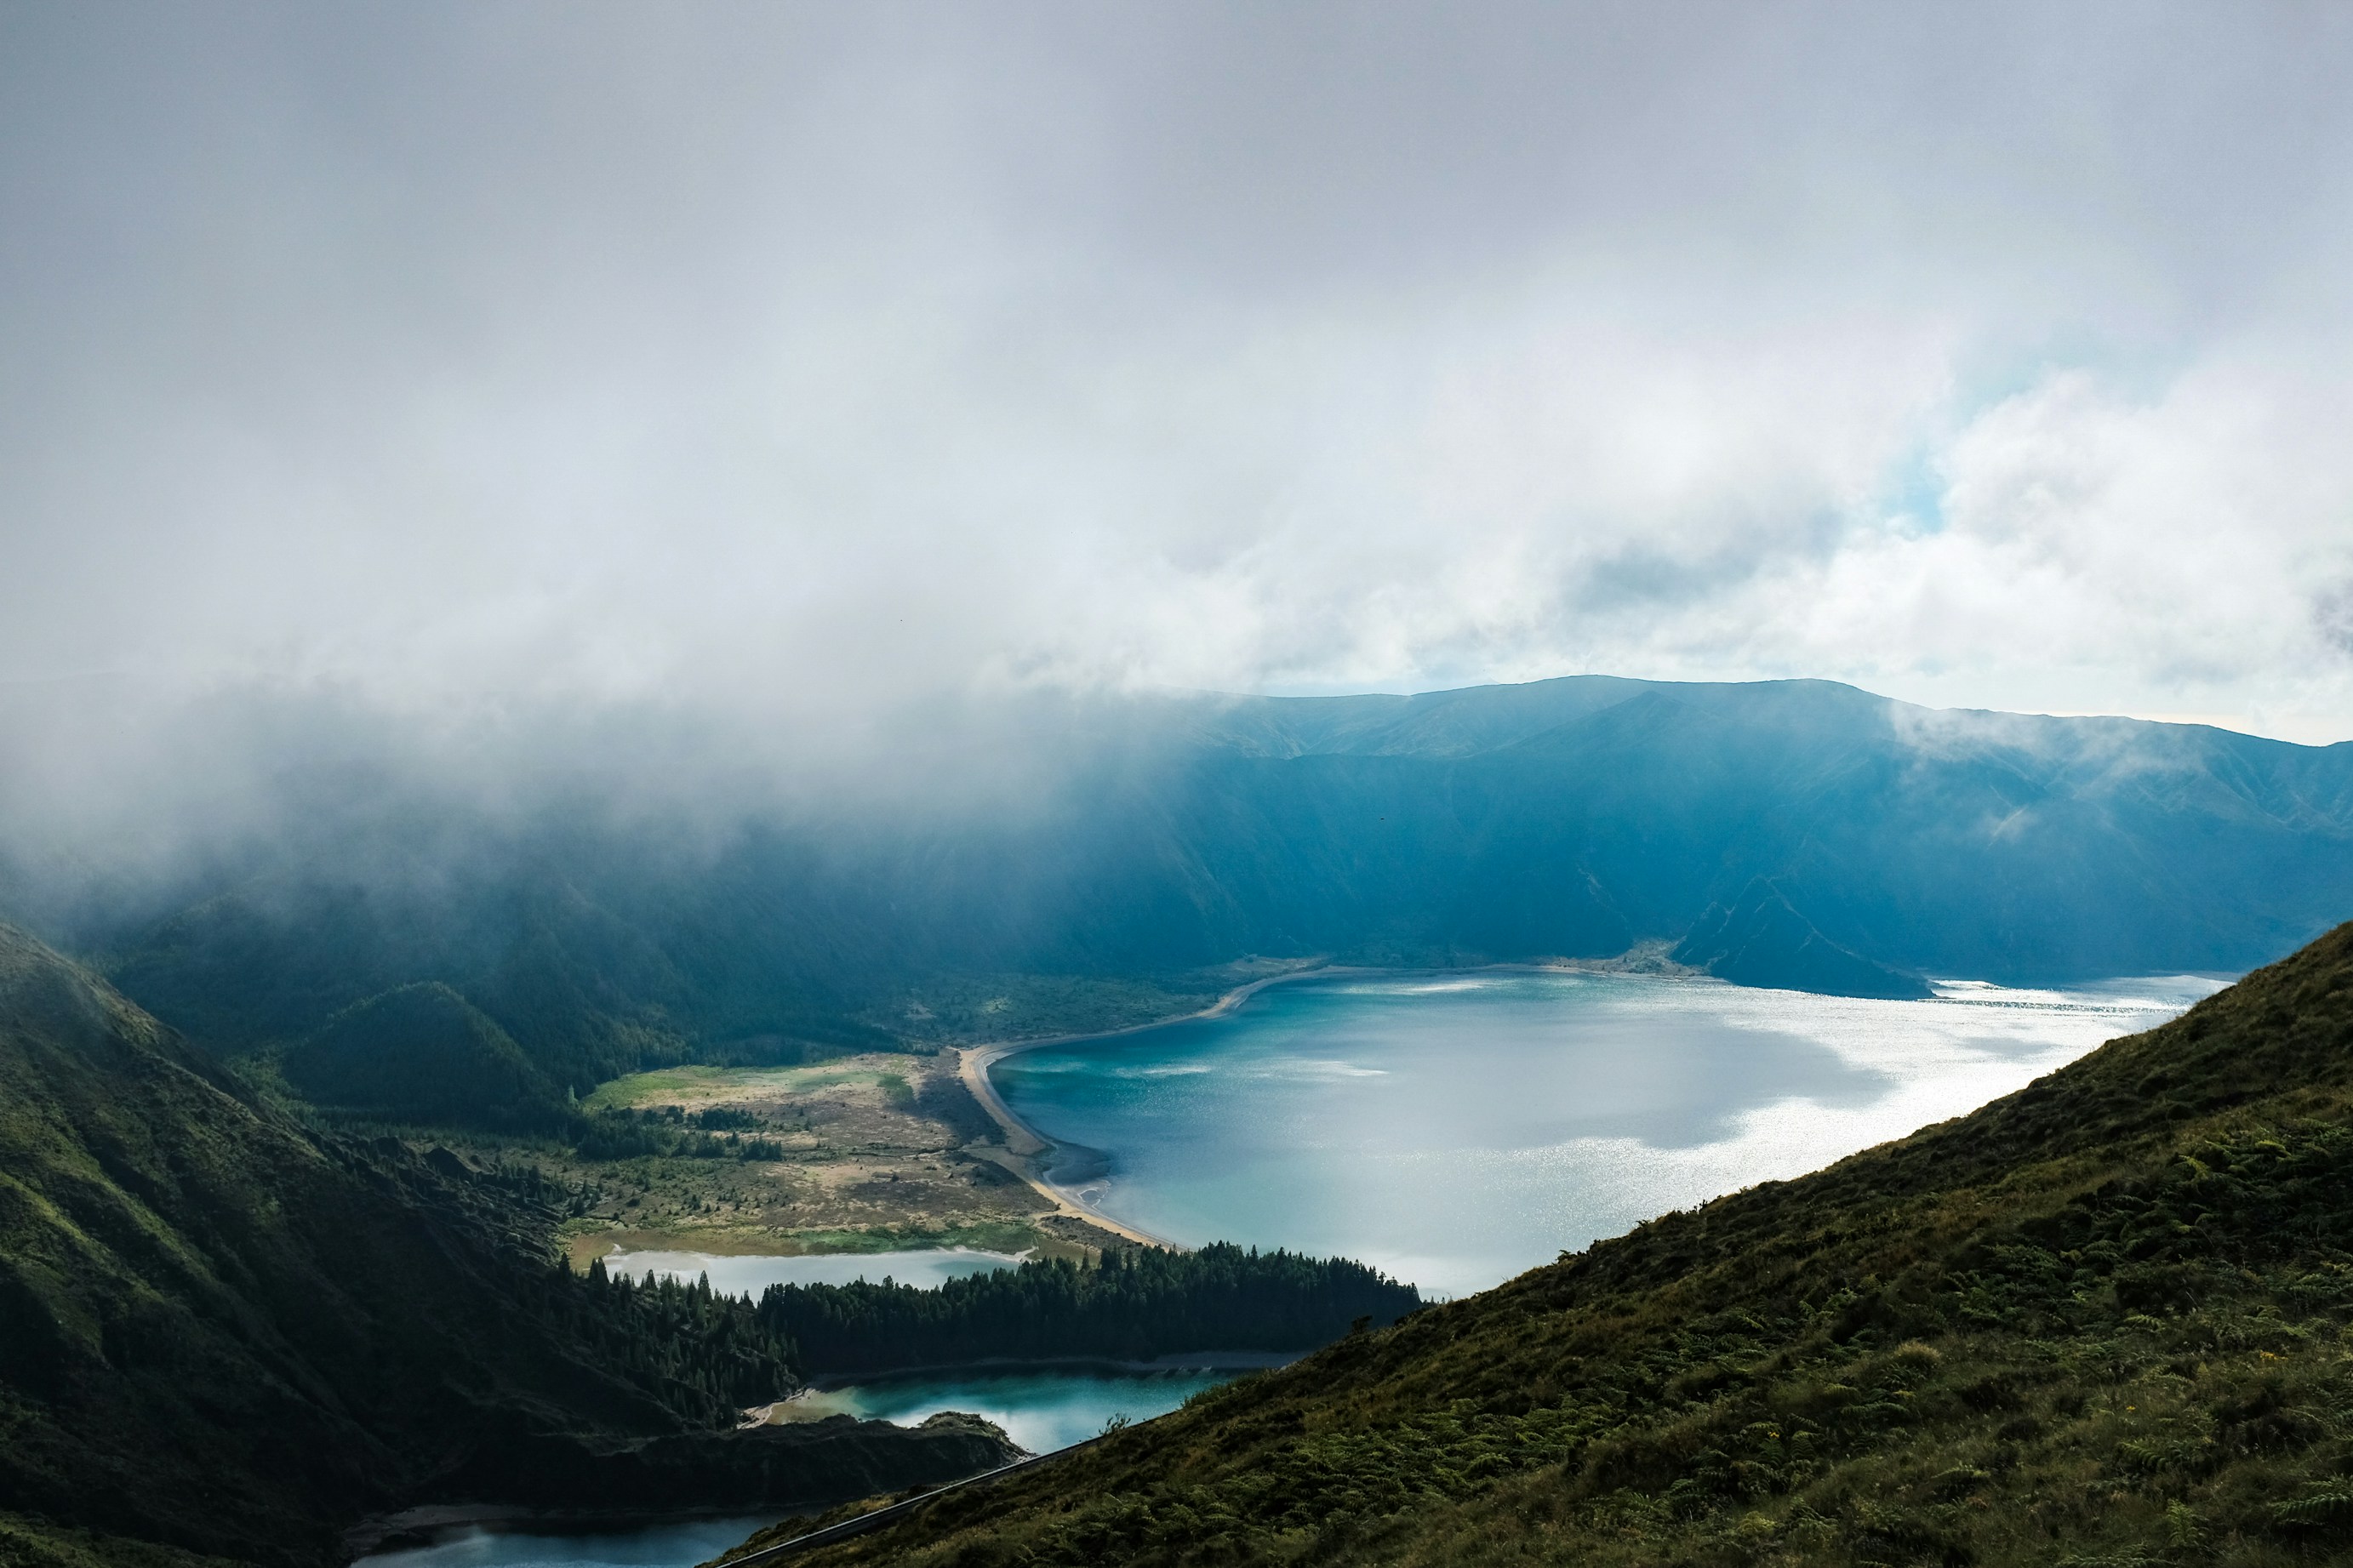 This is one of the biggest lakes in the island of São Miguel in Azores. The view is just breathtaking, it makes you feel like you’re in Jurassic Park. Every time I go visit the Island I always make a stop there, I love the feeling it gives.